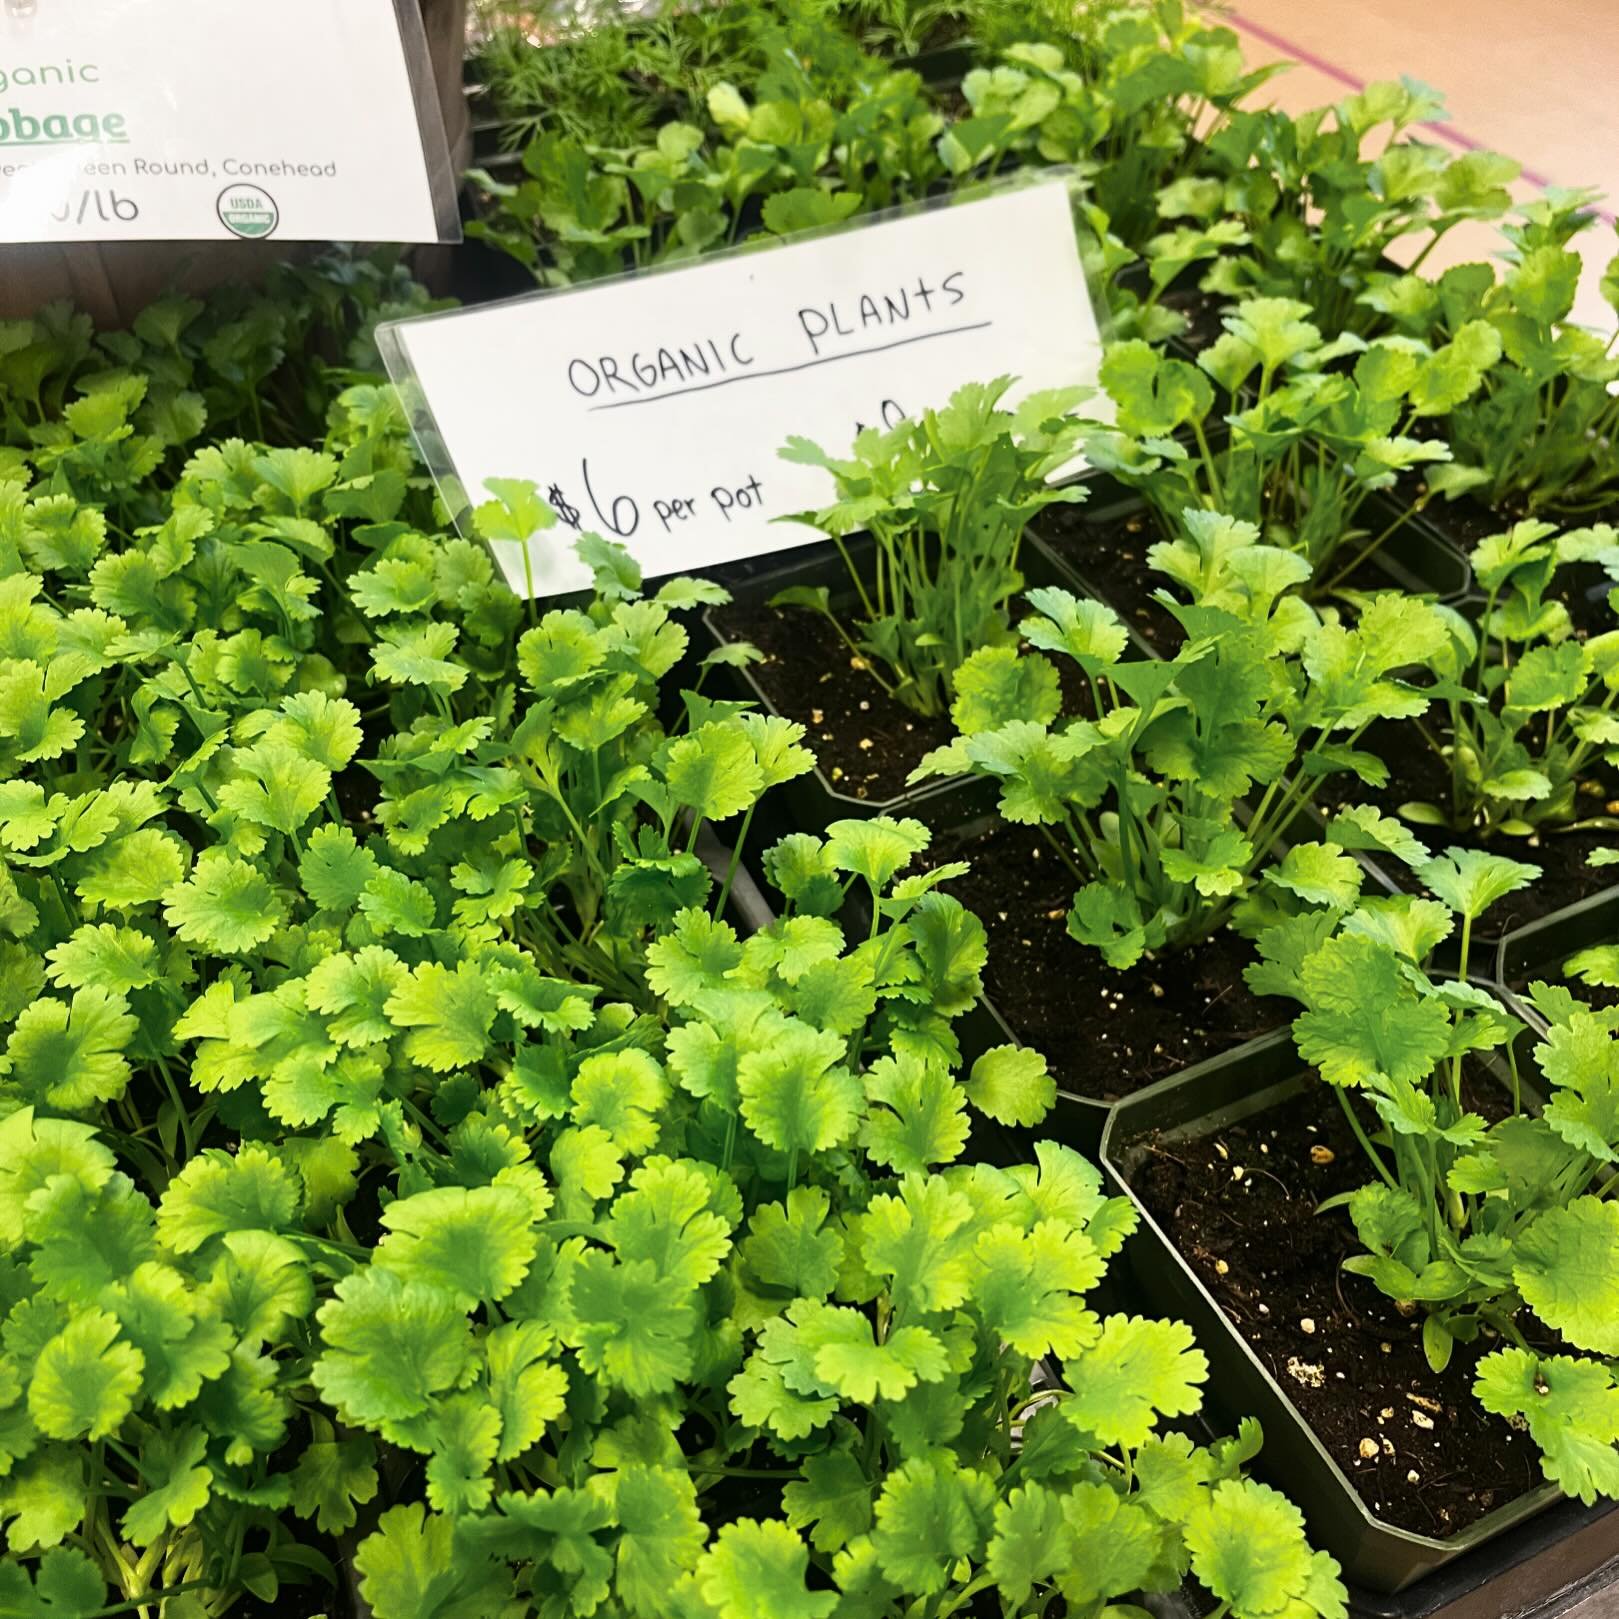 Attention!!! We have reached the point in the season where you can get fresh seedlings! Find them @deeprootsfarmny - these cold weather loving plants are ready to fill your garden beds in the week ahead. 🪴